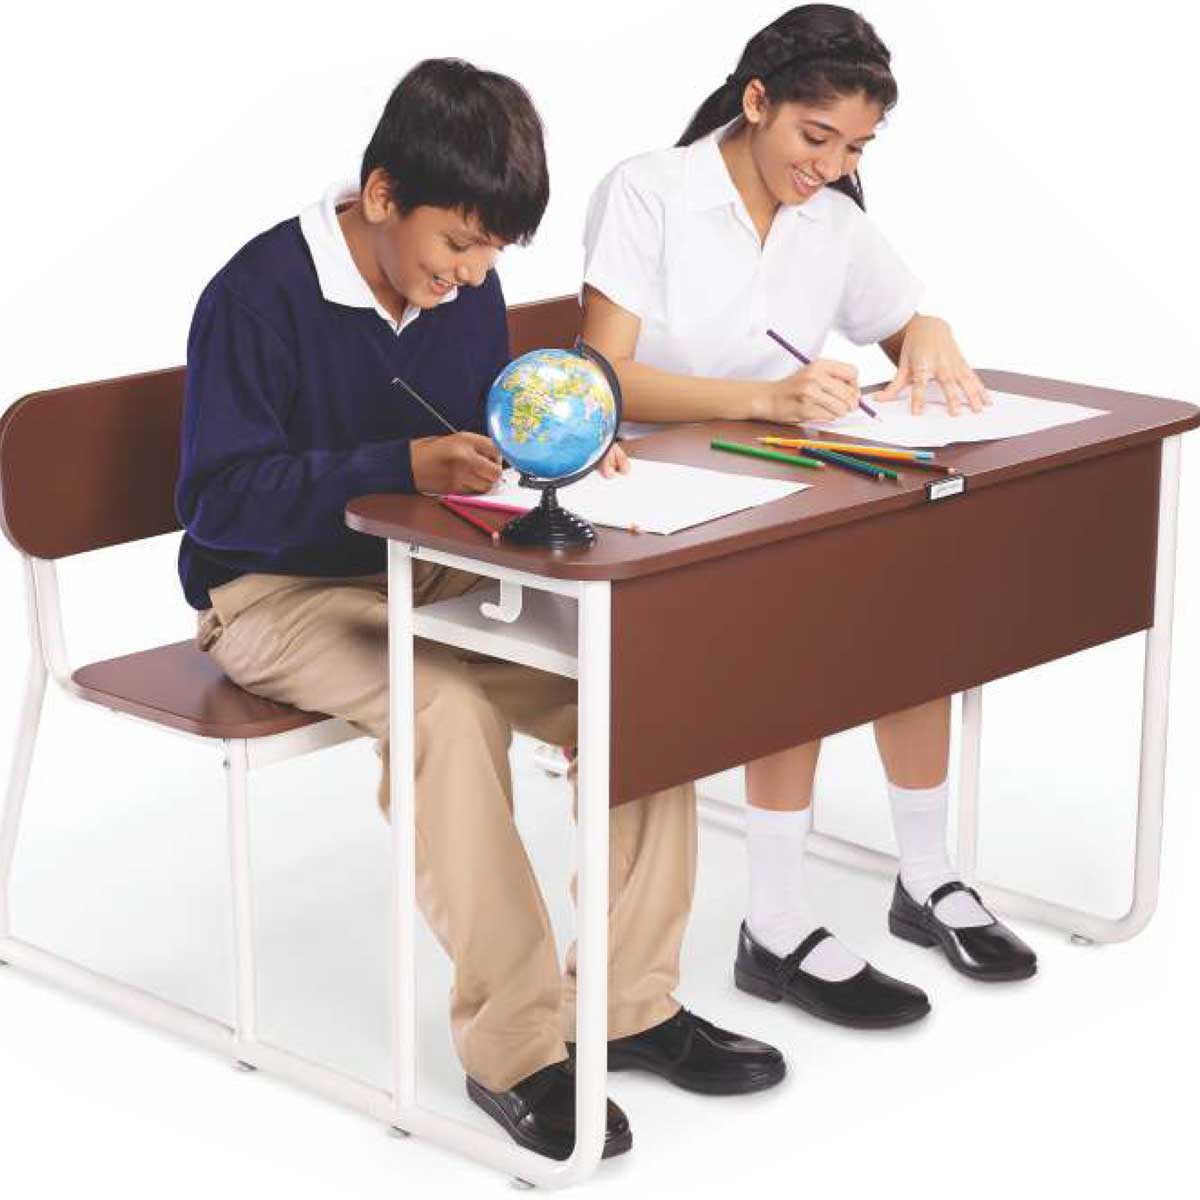 Writing Desk Manufacturers, Suppliers in Kundli Industrial Area